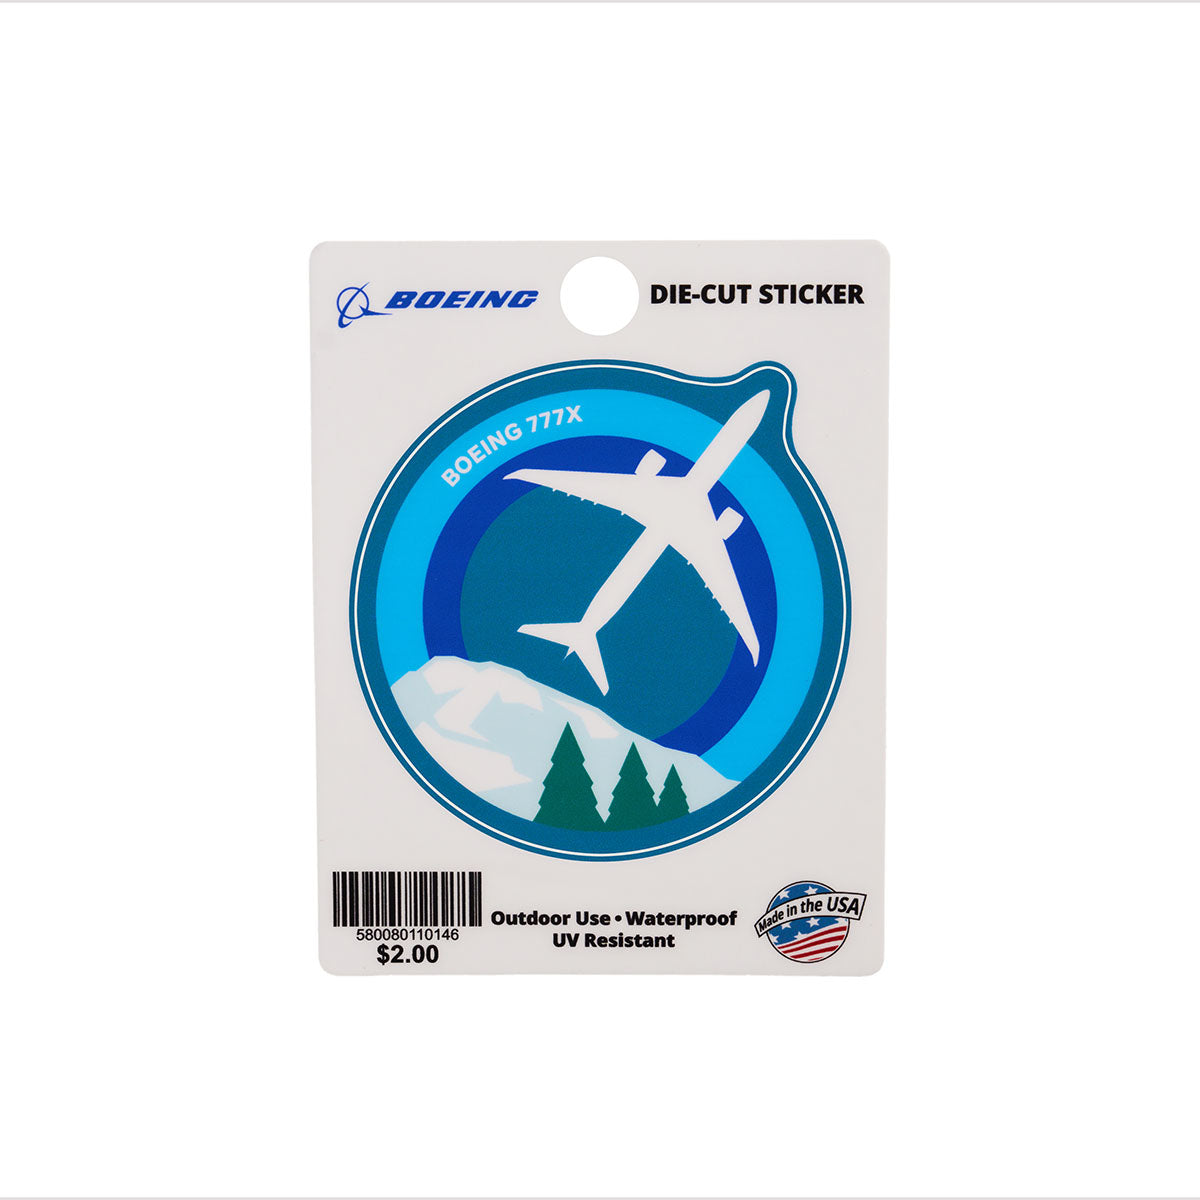 Skyward sticker, featuring the iconic Boeing Boeing 777X in a roundel design.